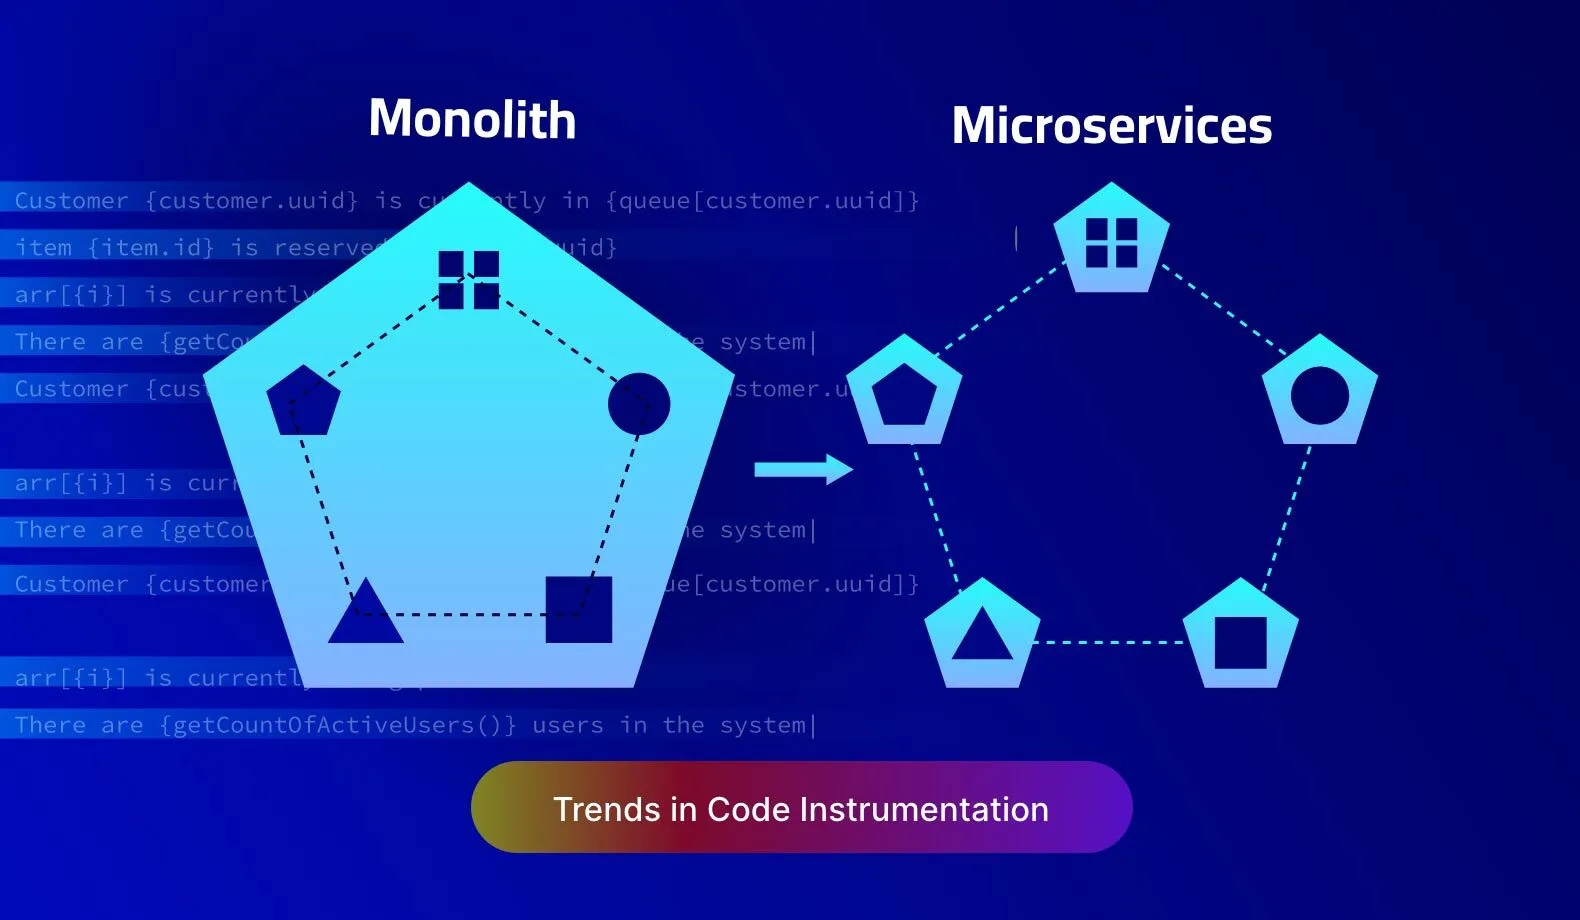 From Monolithic to Microservices: Trends in Code Instrumentation